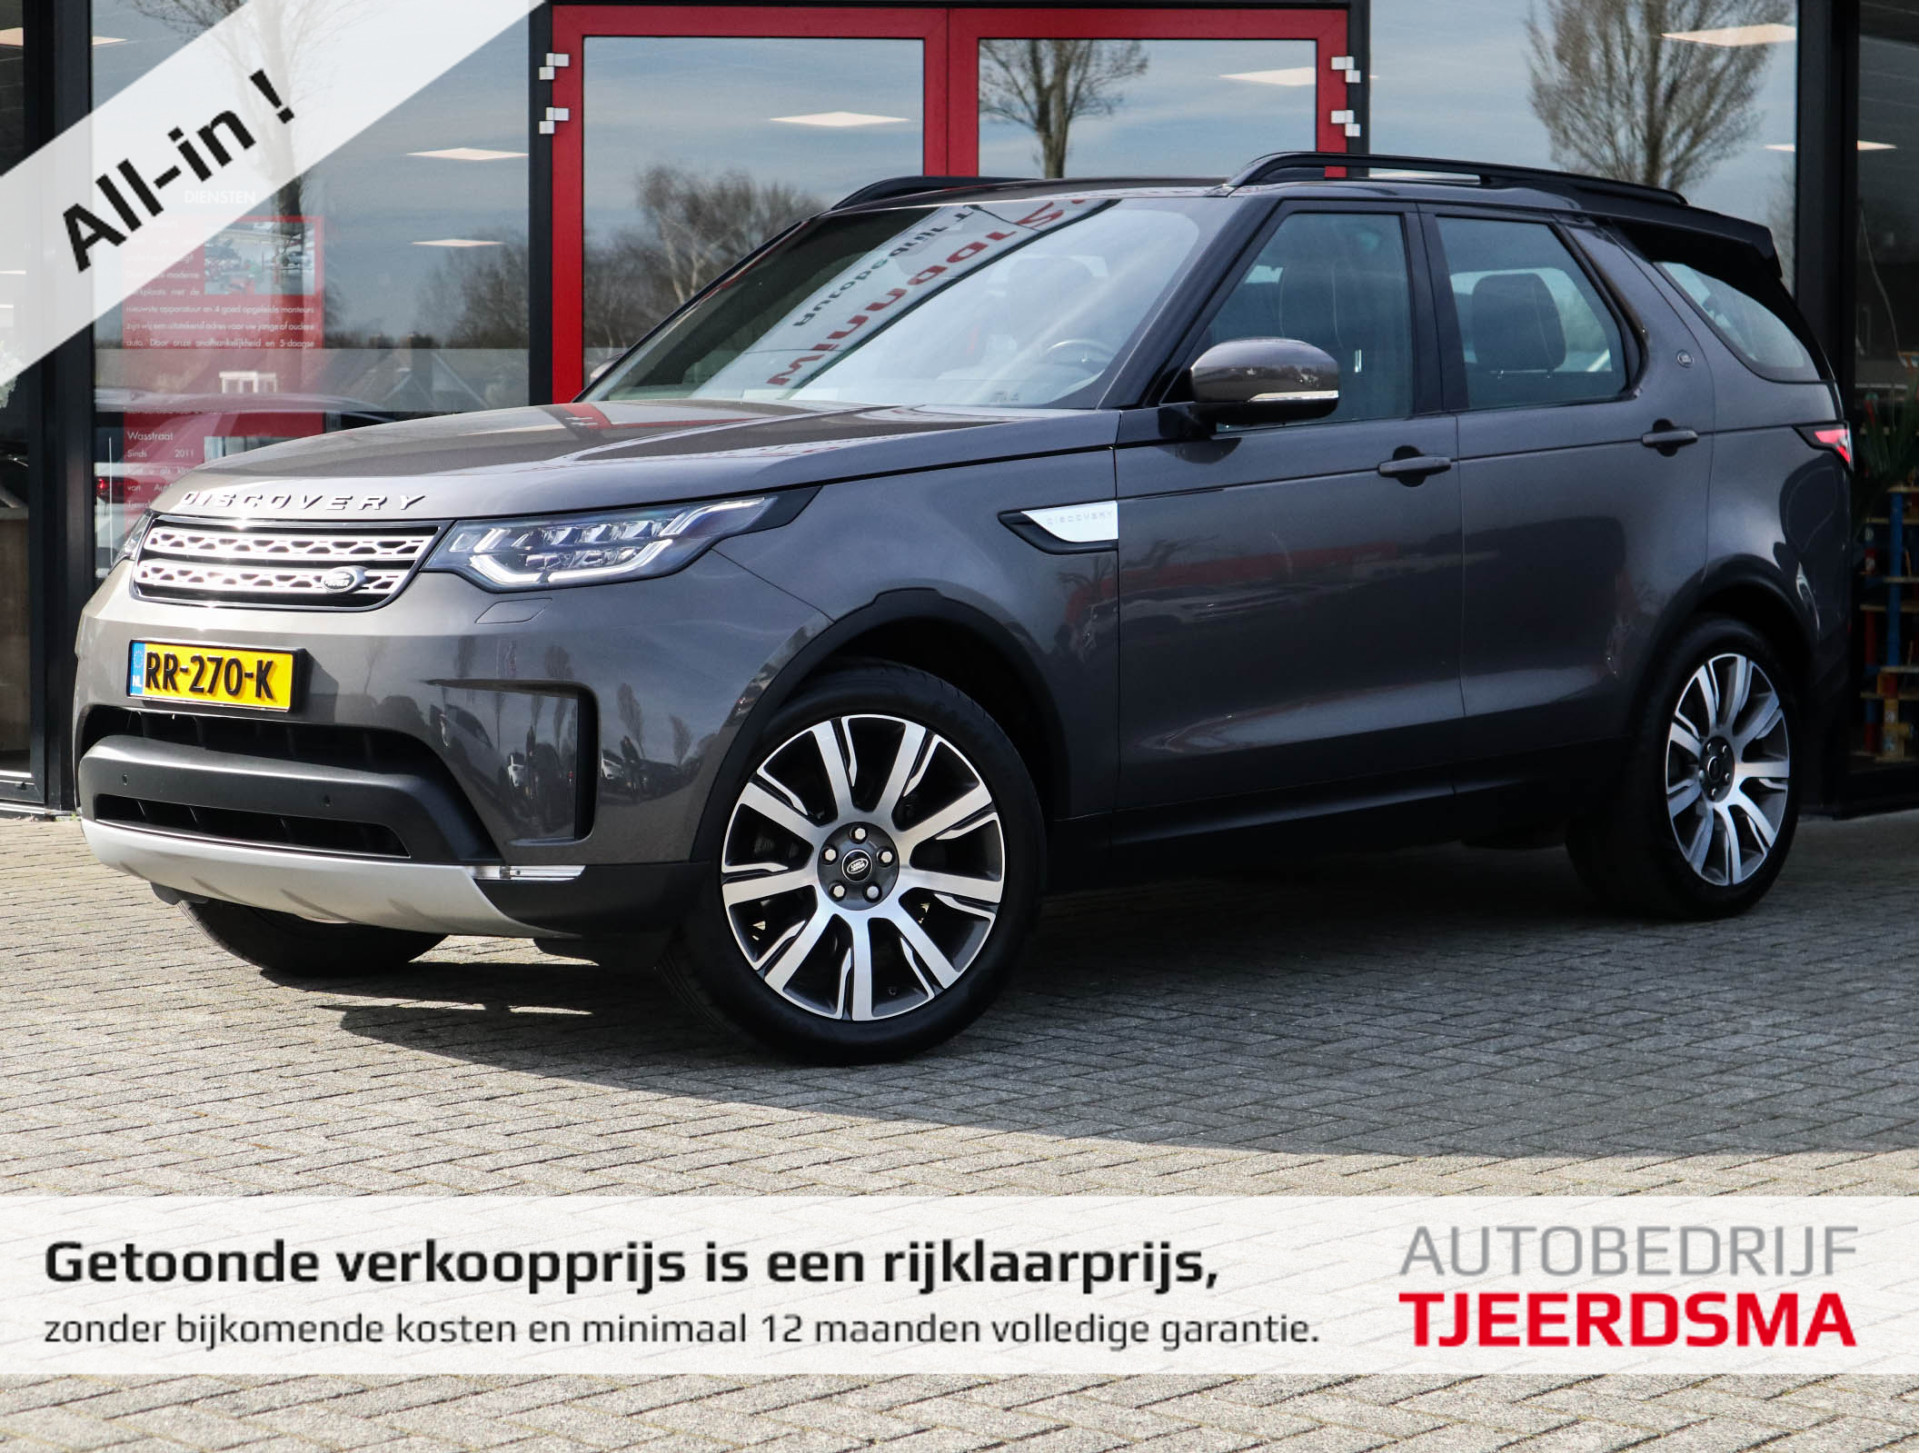 Land Rover Discovery 2.0 Sd4 HSE Luxury 7p. Navi/Clima/Leder/Panodak/7-Persoons/Luchtvering/Trekhaak bij viaBOVAG.nl